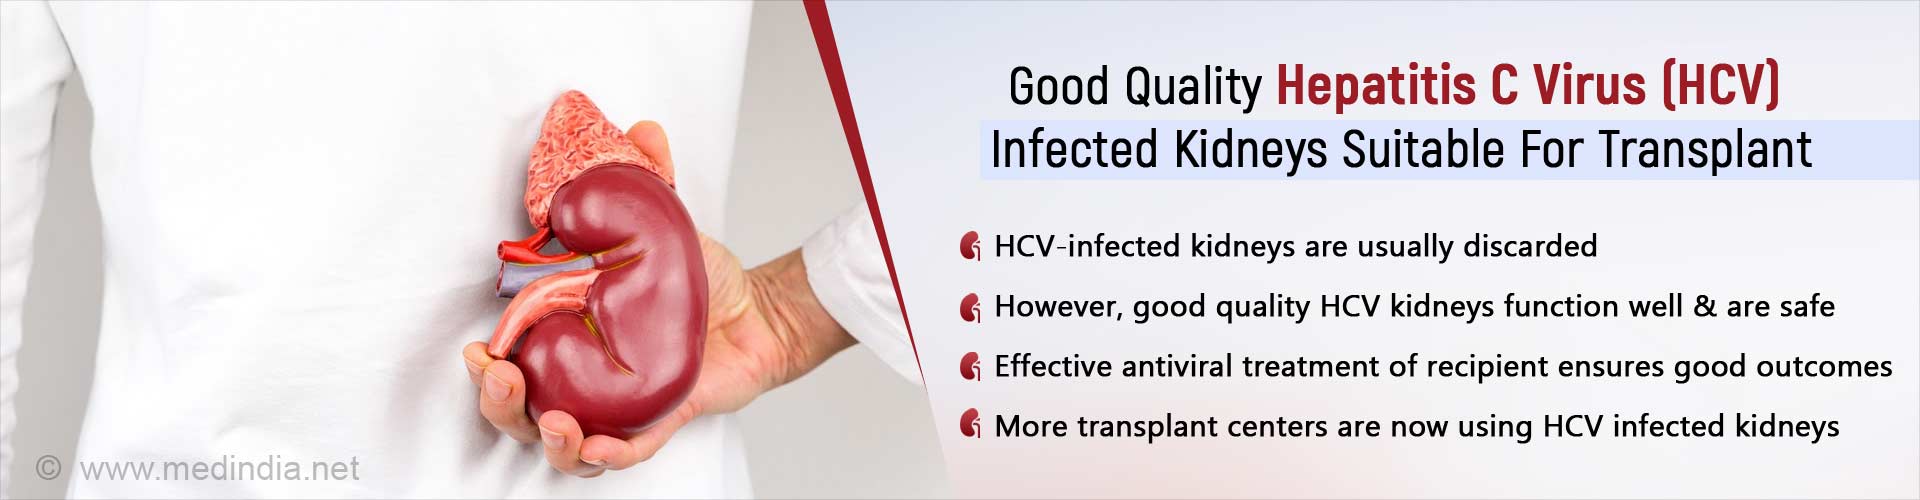 Good quality hepatitis C virus (HCV) infected kidneys suitable for transplant. HCV-infected kidneys are usually discarded. However, good quality HCV kidneys function well and are safe. Effective antiviral treatment of recipient ensures good outcomes. More transplant centers are now using HCV infected kidneys.